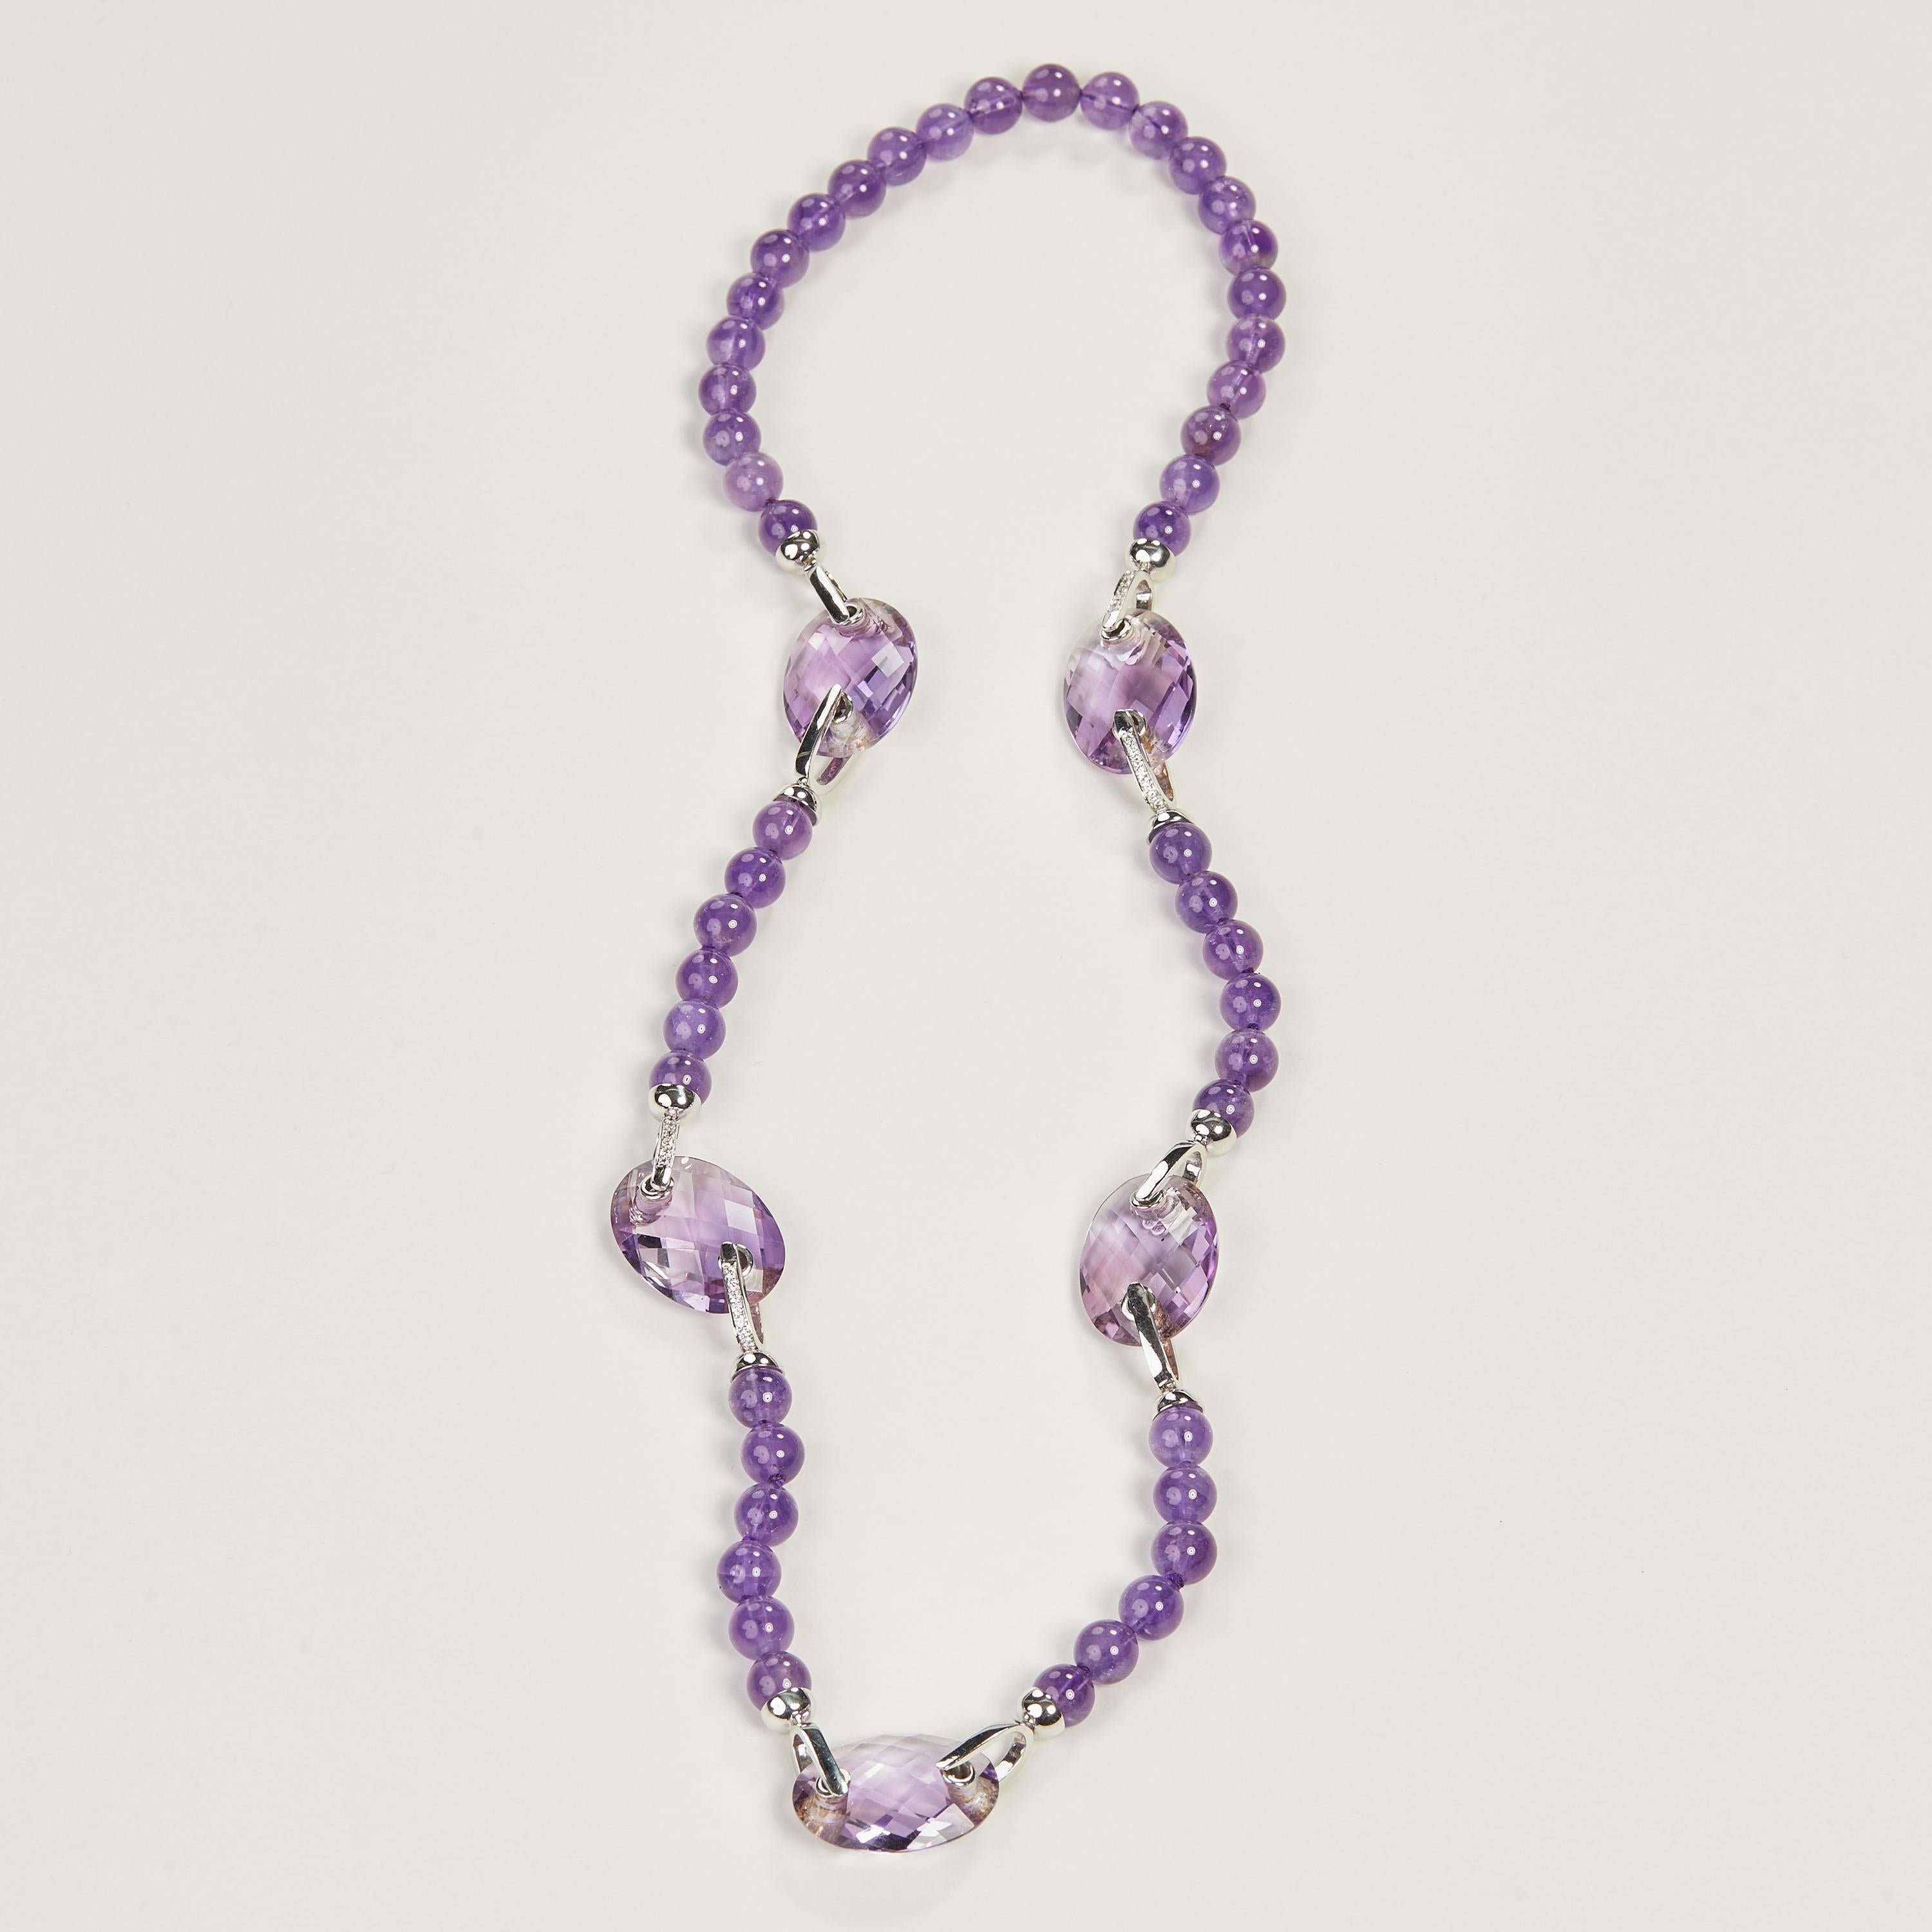 18 Karat White Gold Diamond and Amethyst Necklace
70 Diamonds 0.84 Carat
5 Amethyst Oval  99,53 Carat
48 Amethyst balls 57,04 Carat

Founded in 1974, Gianni Lazzaro is a family-owned jewelery company based out of Düsseldorf, Germany.
Although rooted